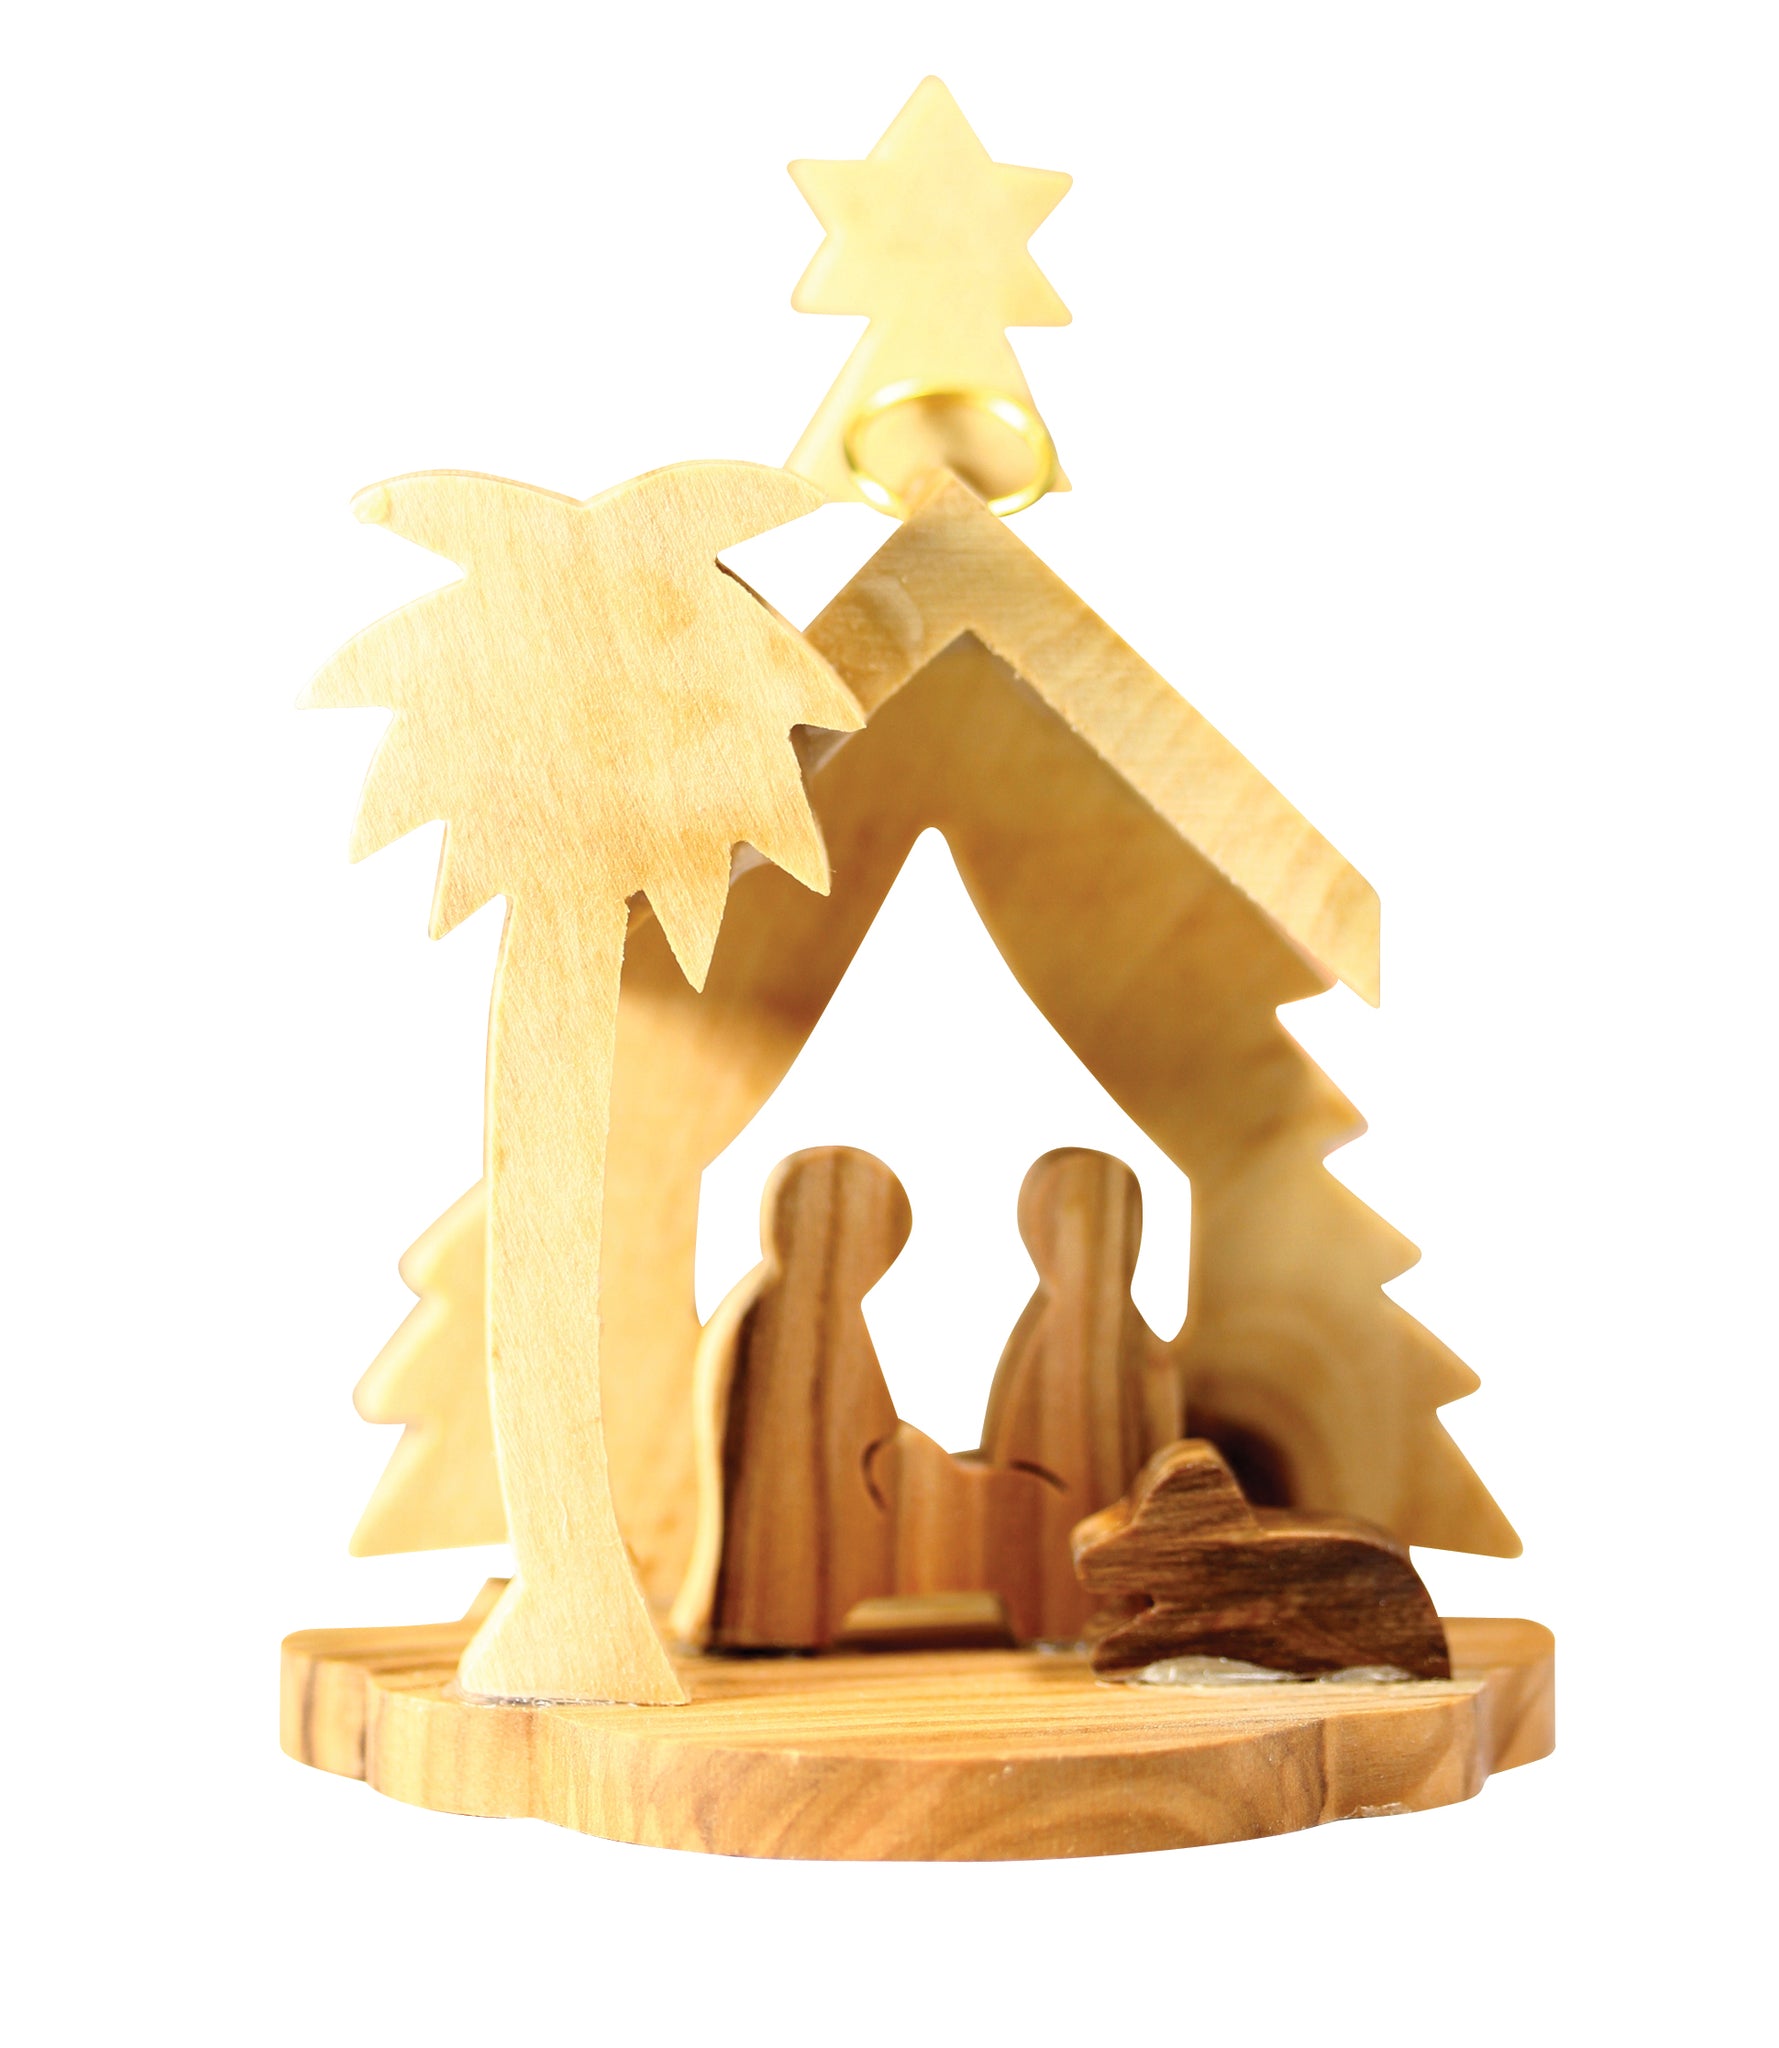 Nativity Tree Ornament (Bs-416)Nativity Tree Ornament (Bs-416)